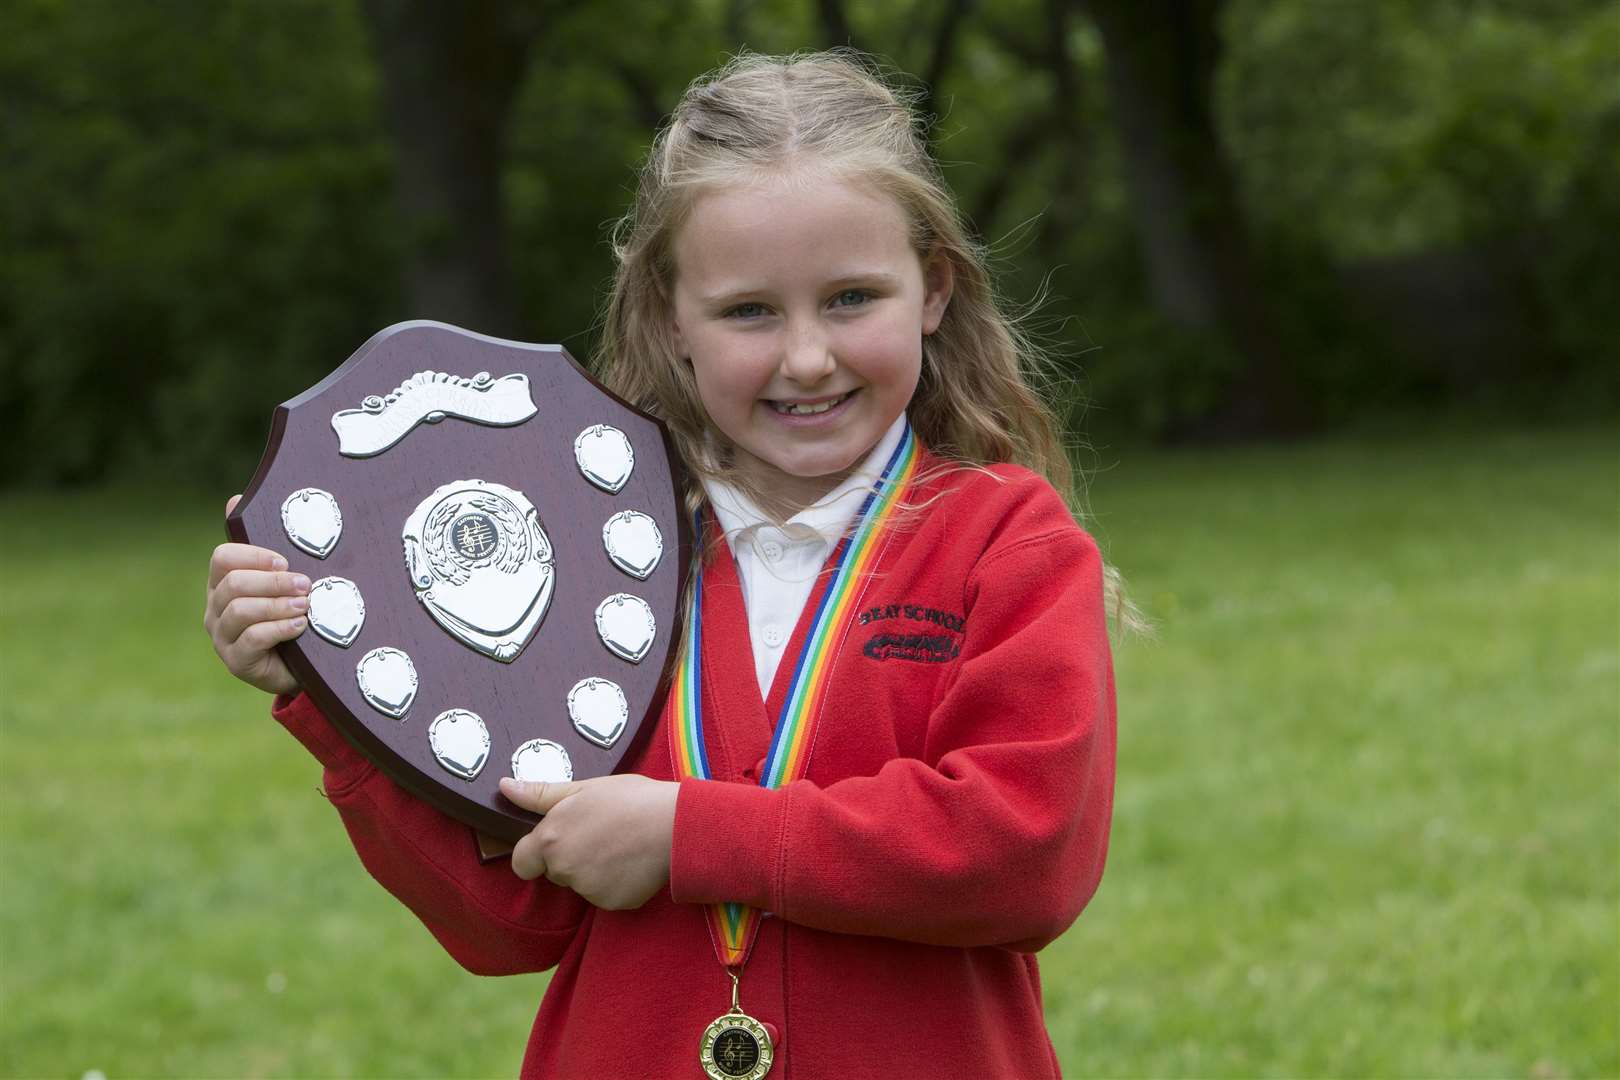 Isla Sutherland is the first winner of the Diana Curran Memorial Shield for verse speaking, P3 girls. The shield was donated by Dennis Lundie, retired head teacher of Wick North Primary School, in memory of his partner. It is one of two memorial shields donated this year by Mr Lundie. The other is in memory of his late father. Picture: Robert MacDonald / Northern Studios